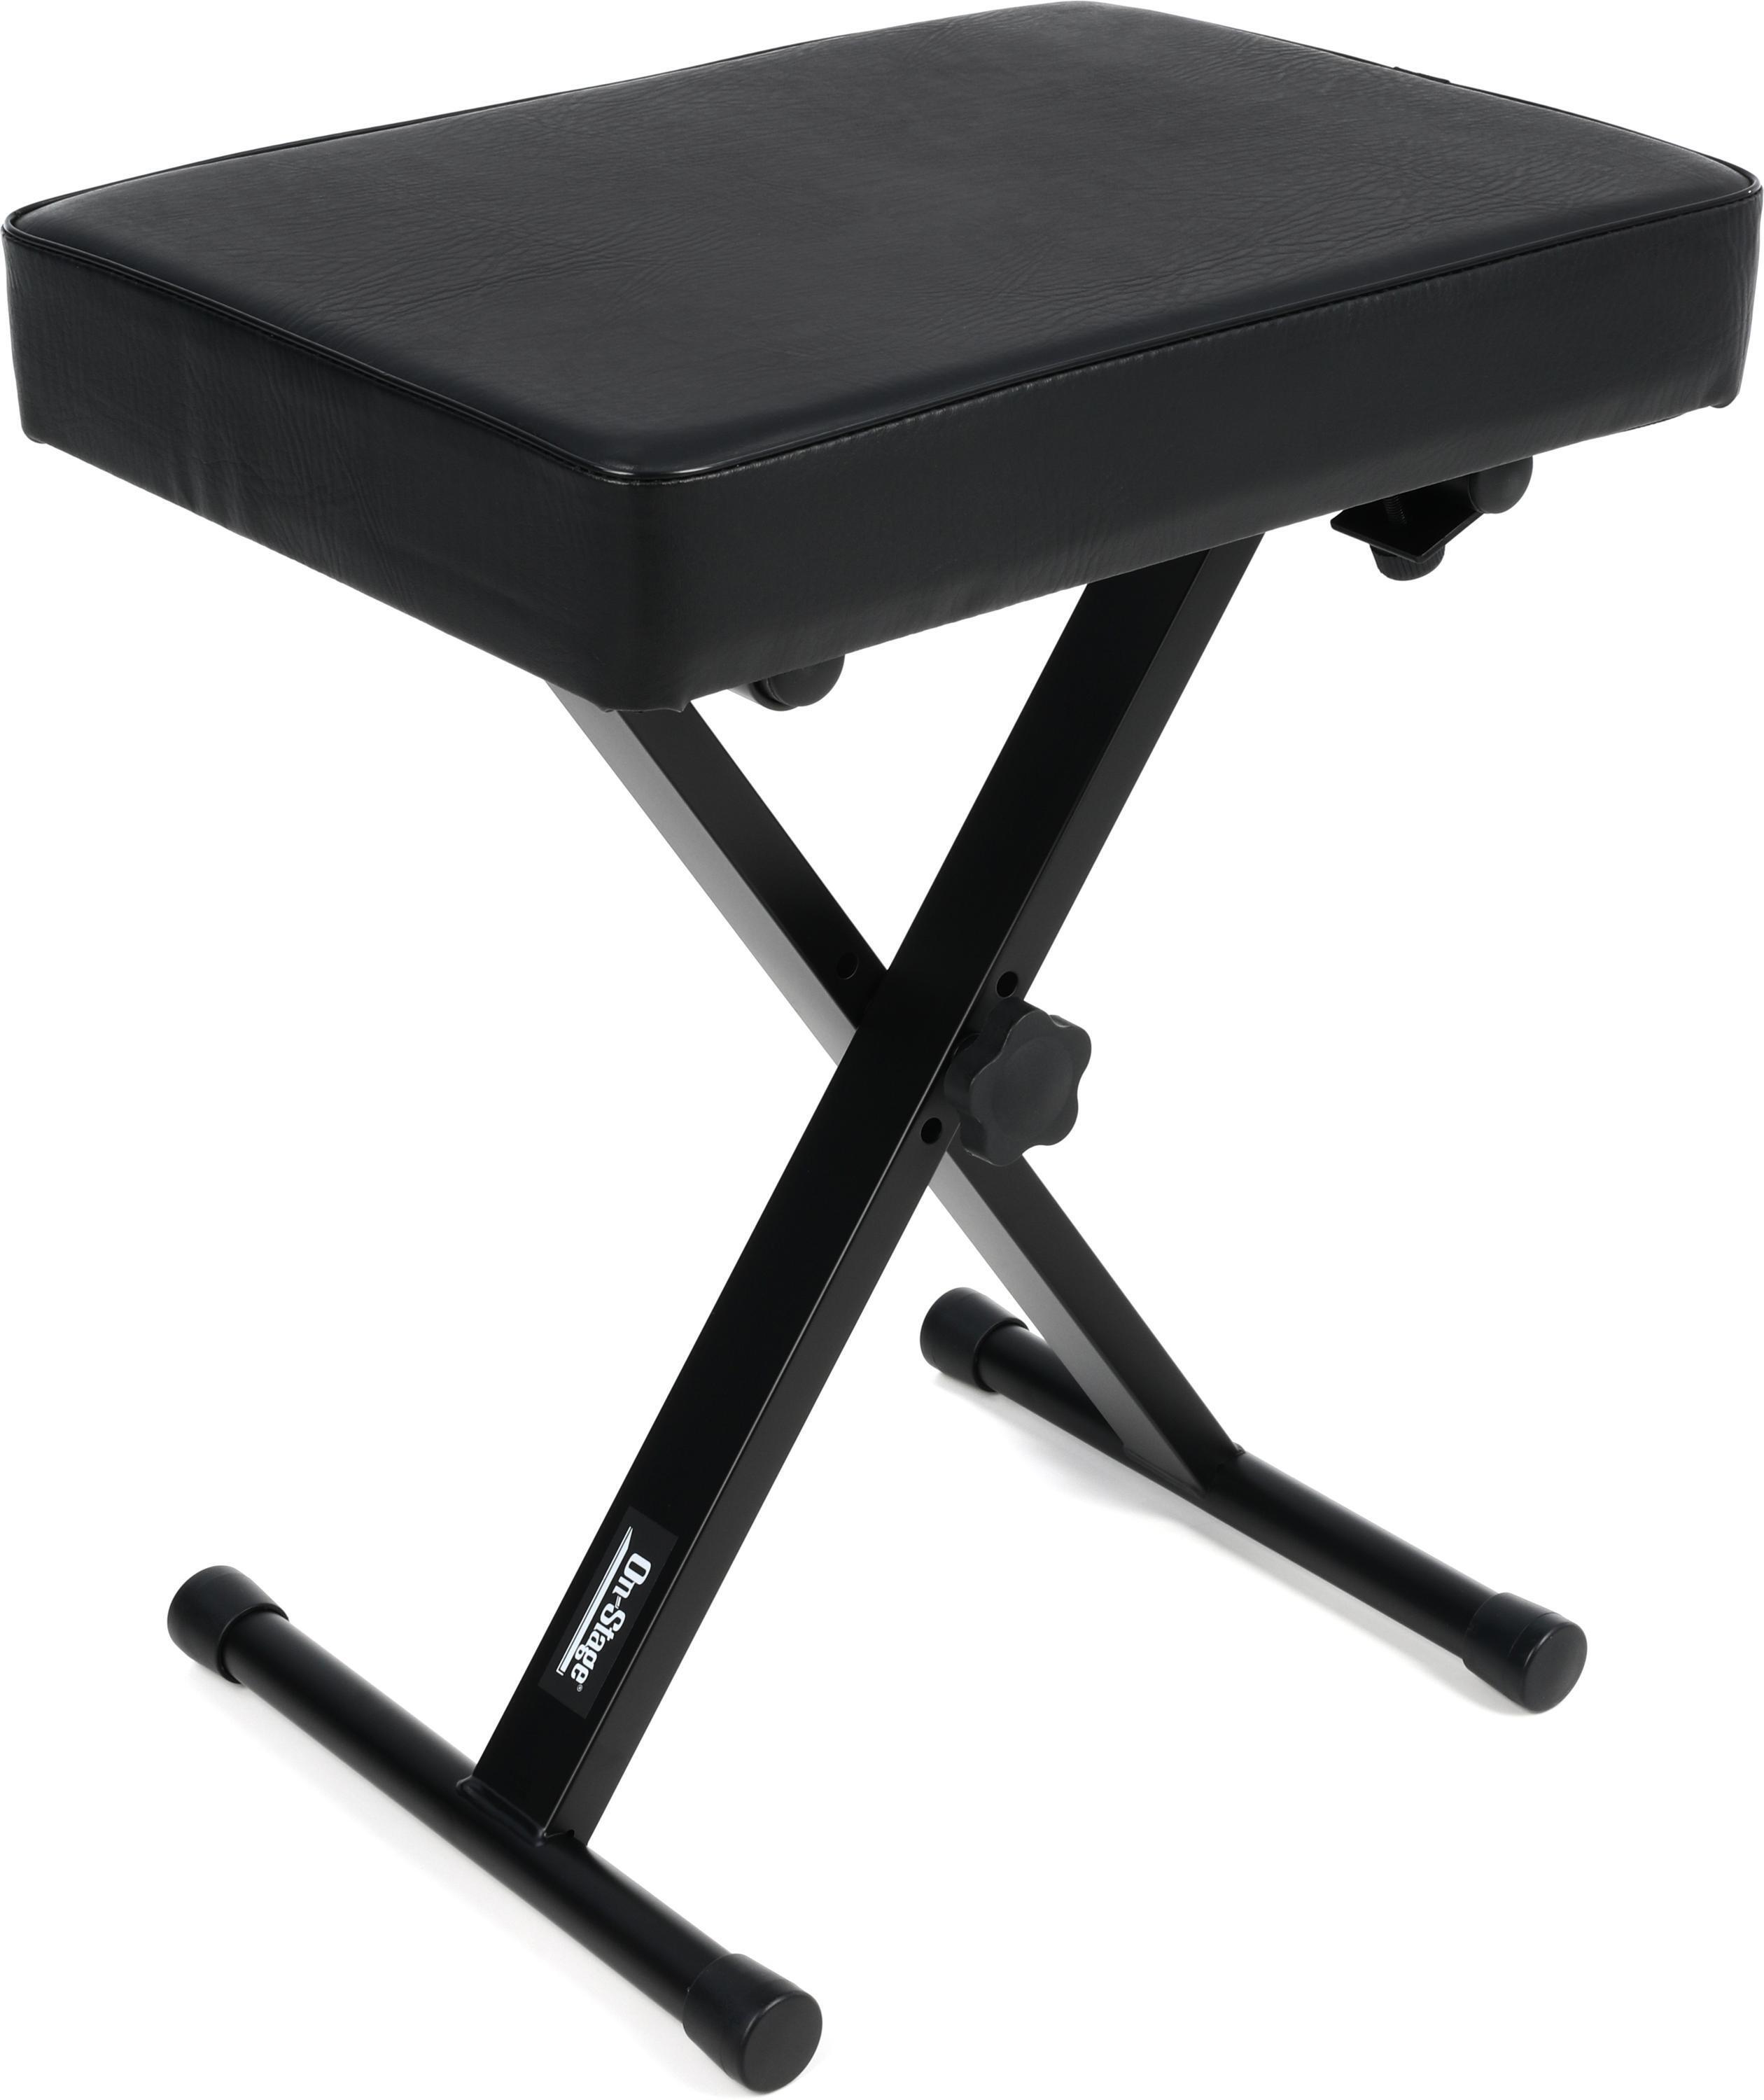 Bundled Item: On-Stage KT7800 Three-Position X-Style Bench